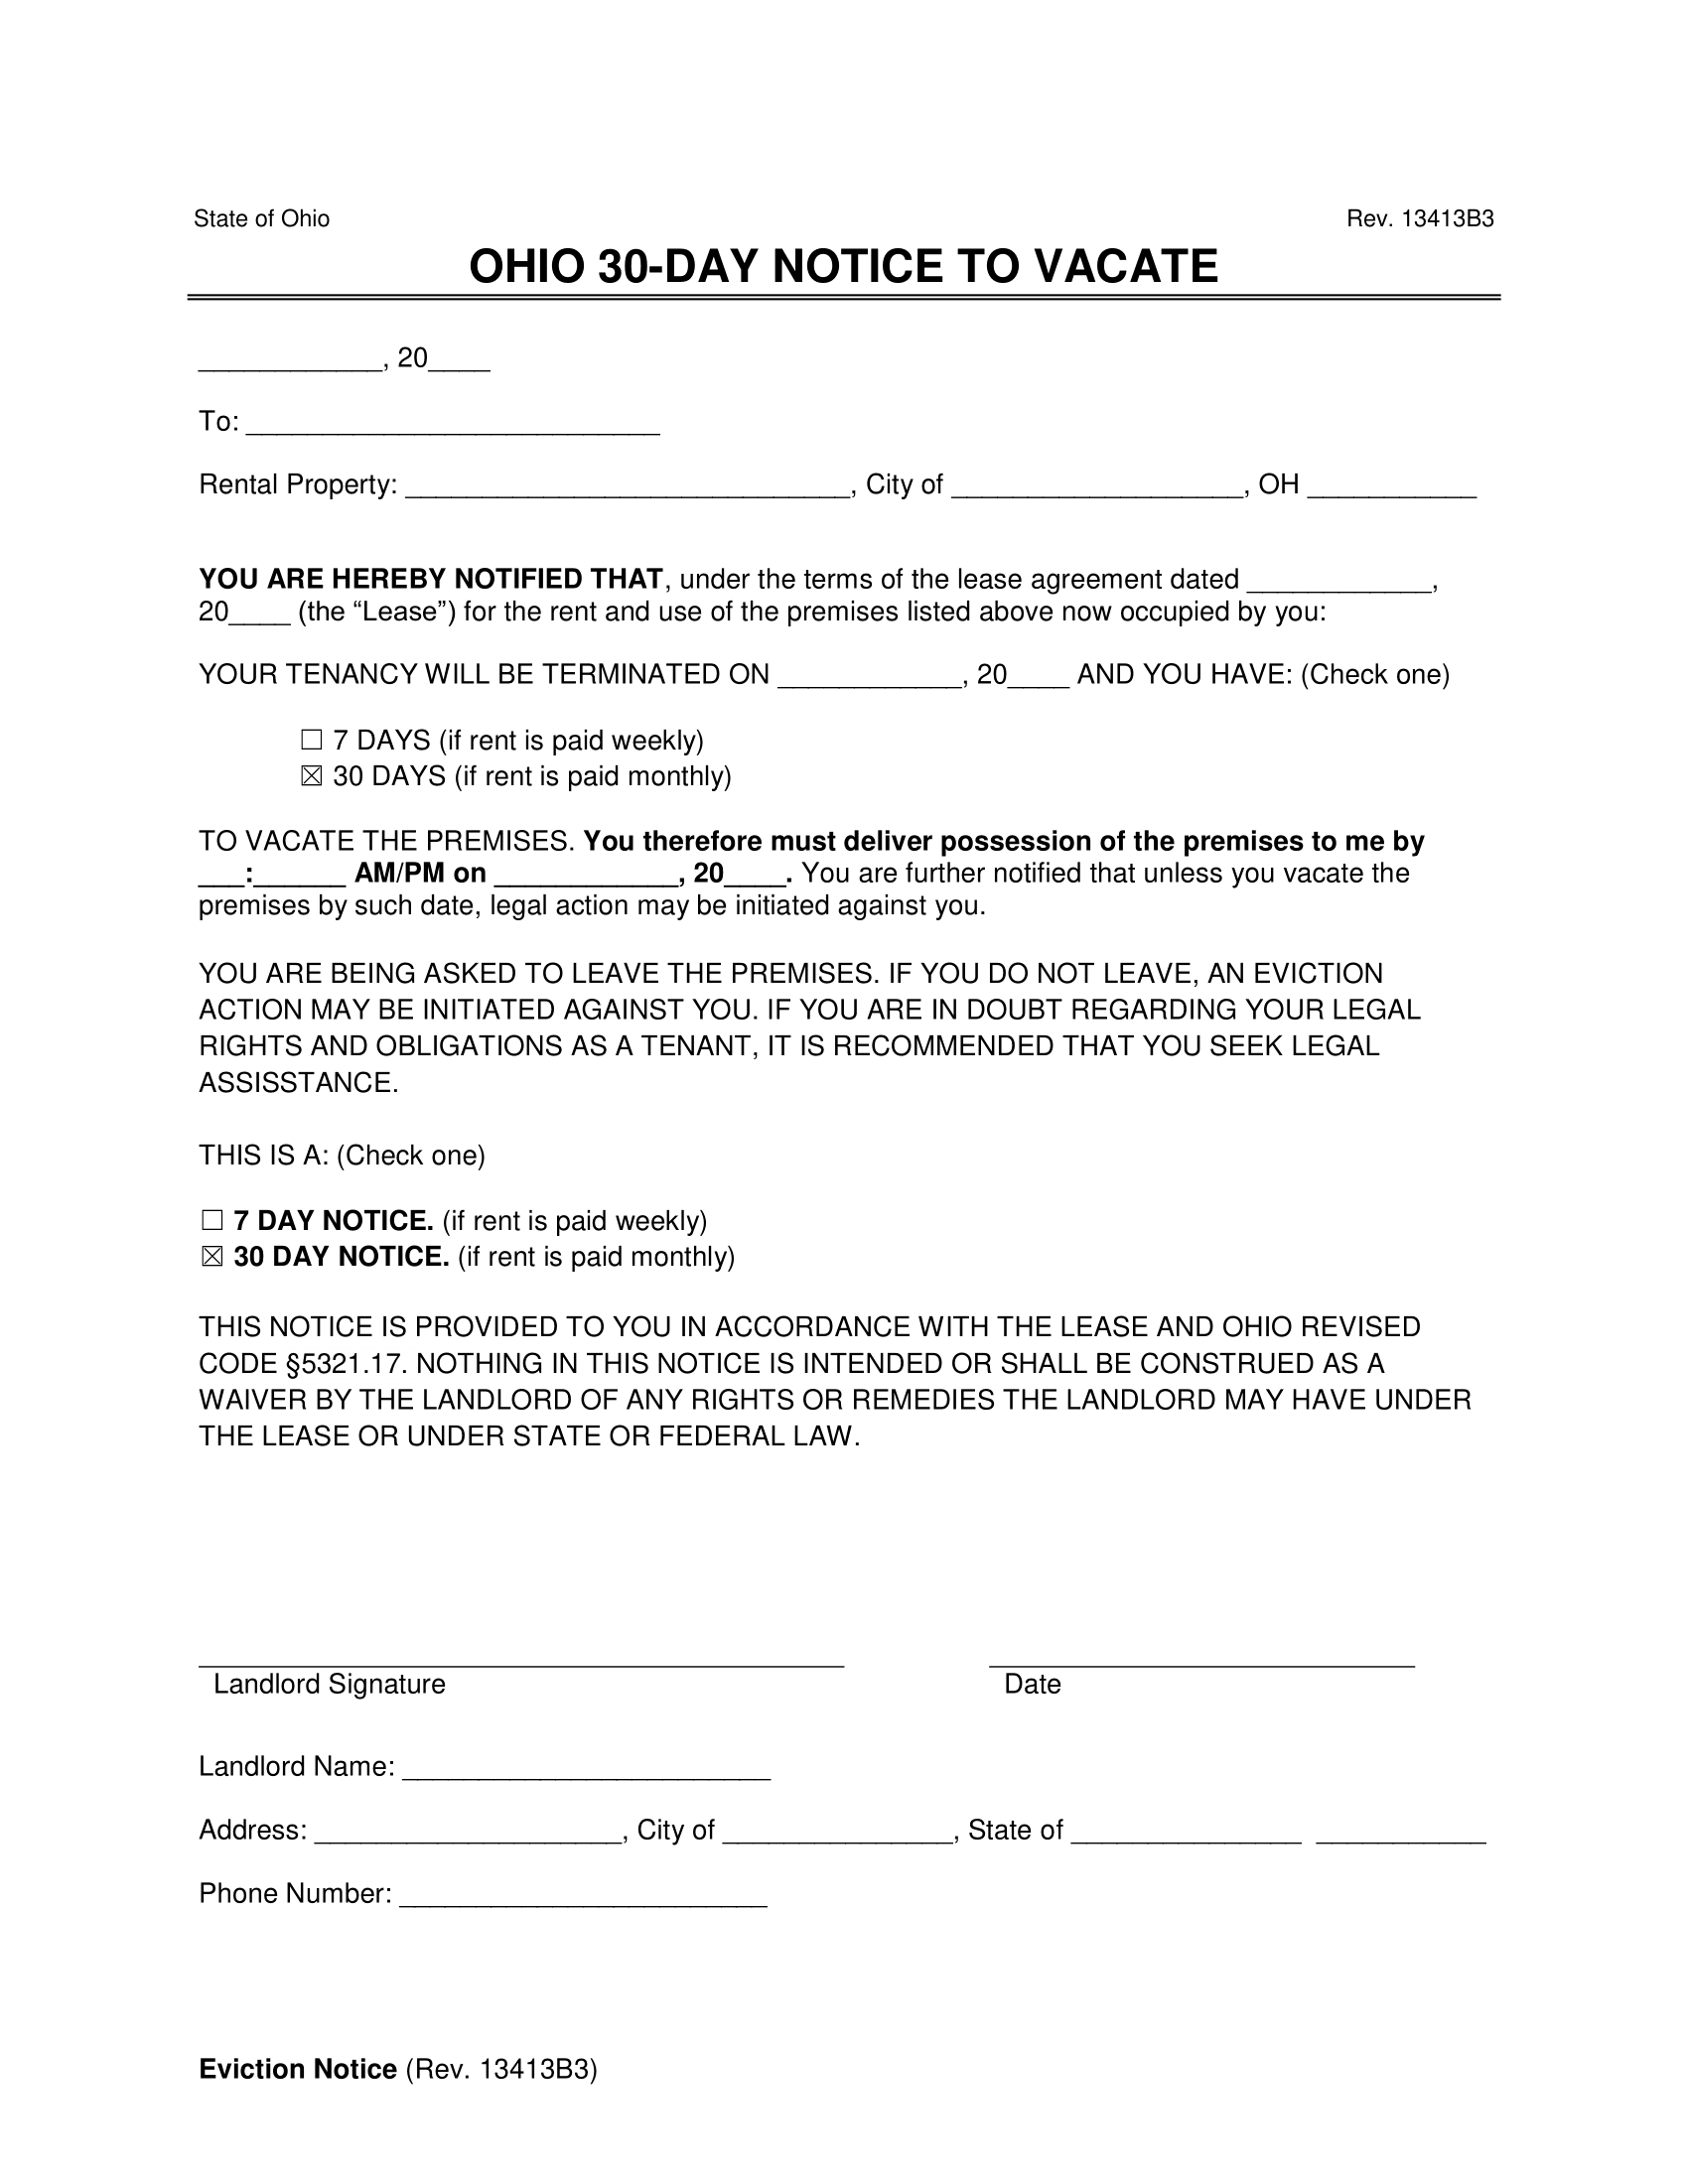 Ohio 30-Day Lease Termination Letter